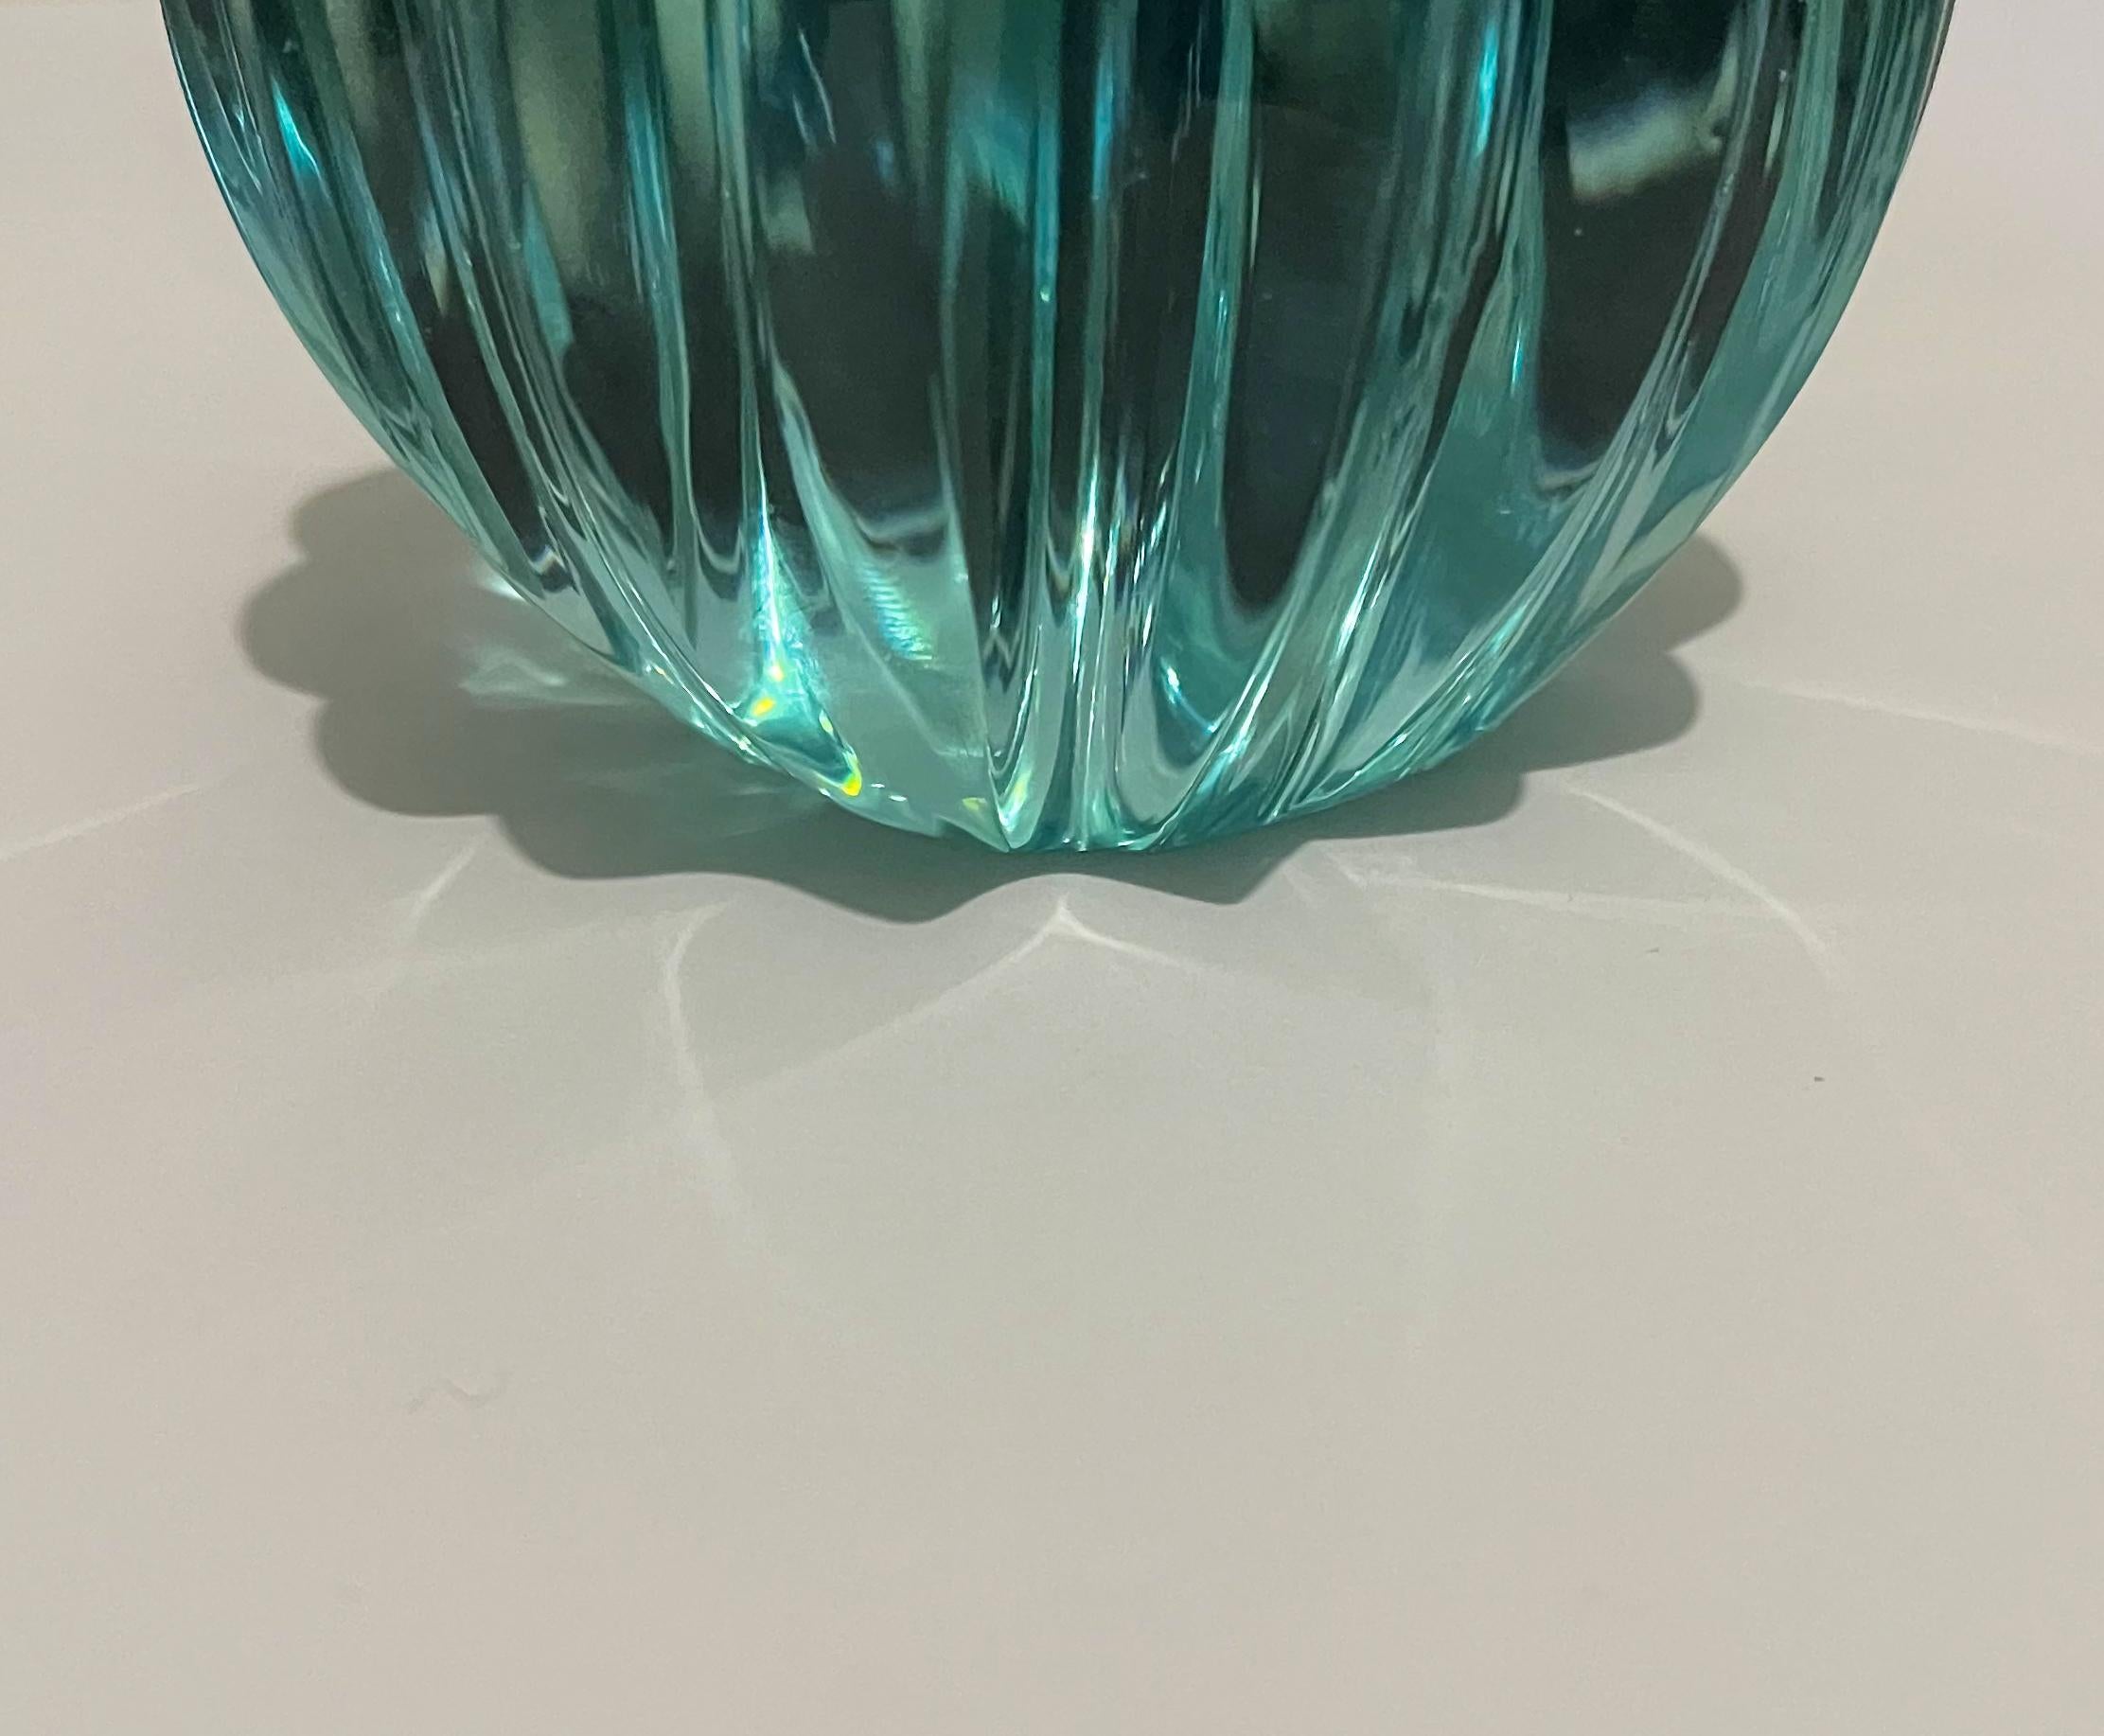 Italian Contemporary Hand-engraved Aquamarine Sculpture by Ghirò Studio For Sale